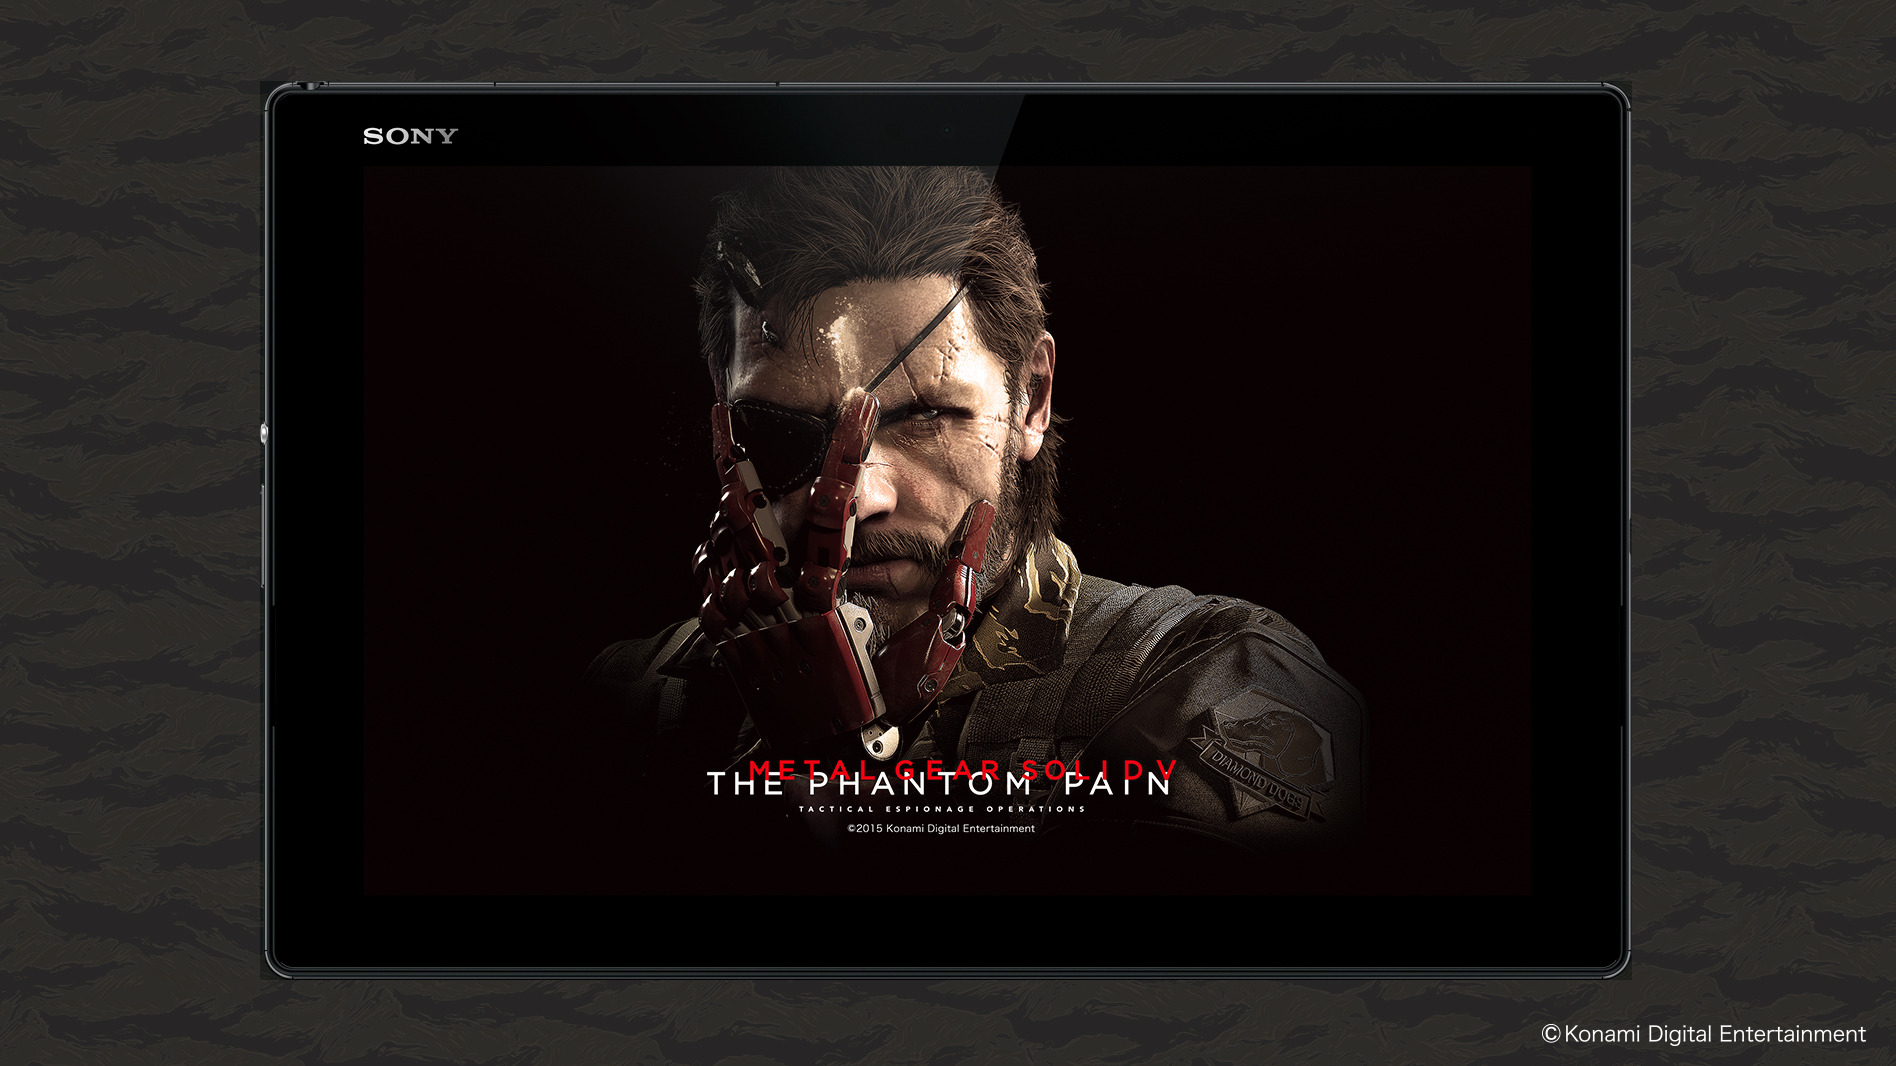 Xperia Tablet Metal Gear Solid V The Phantom Pain Edition Xperia Tm Tablet ソニー